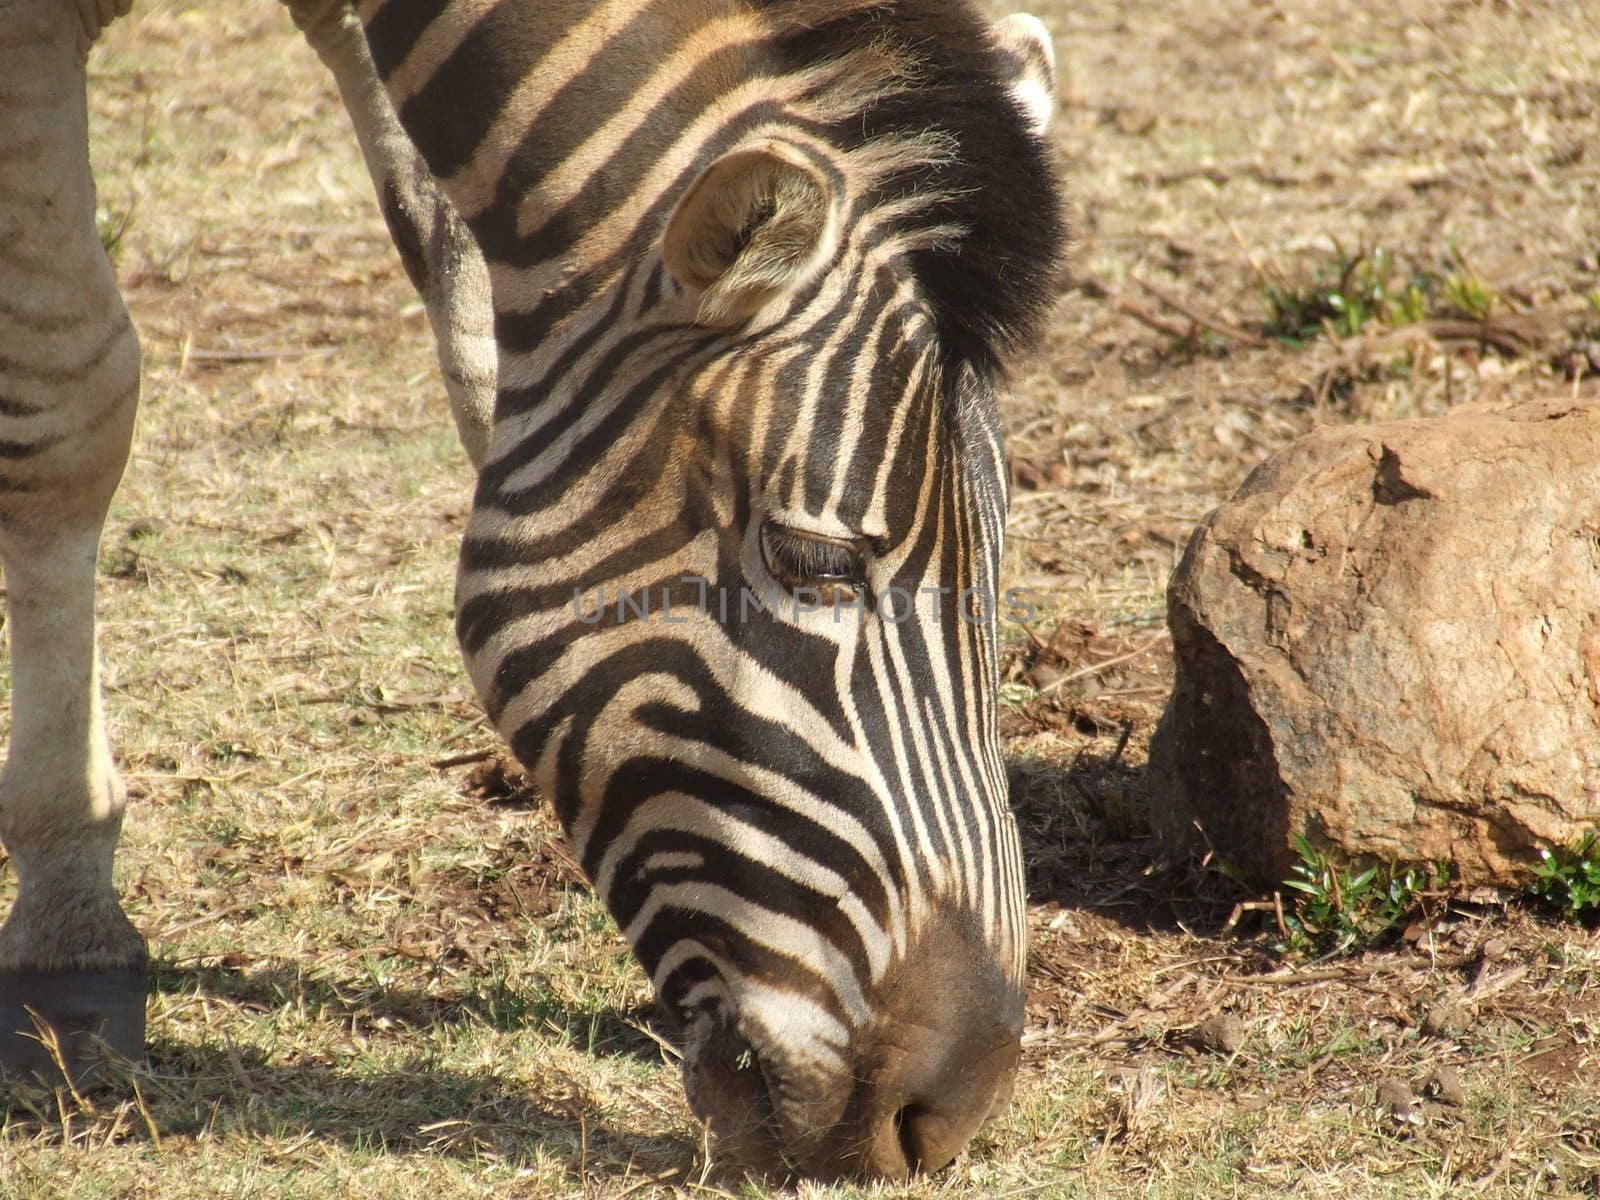 Zebra grazing peacefully in a game reserve in South Africa